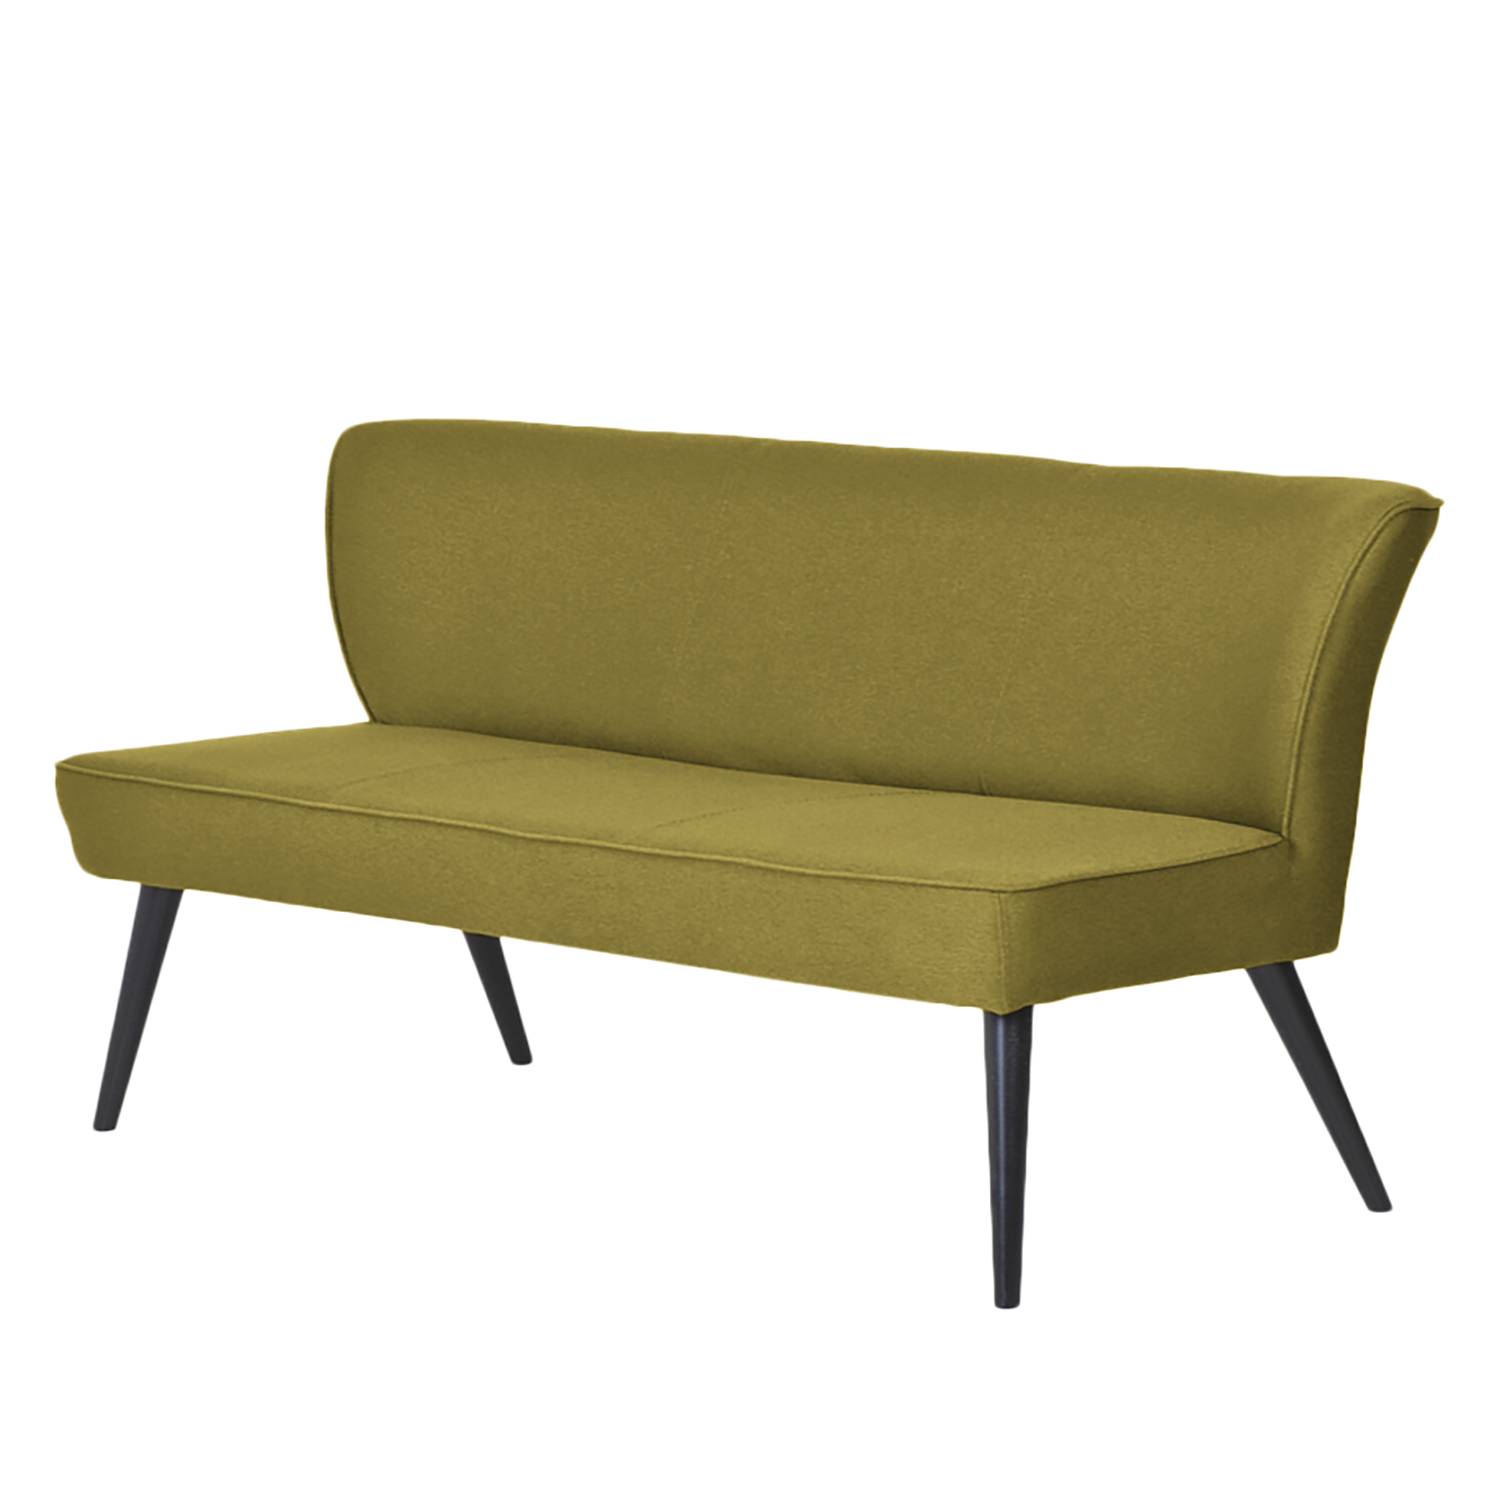 Image of Banquette Cristalina 000000001000181962